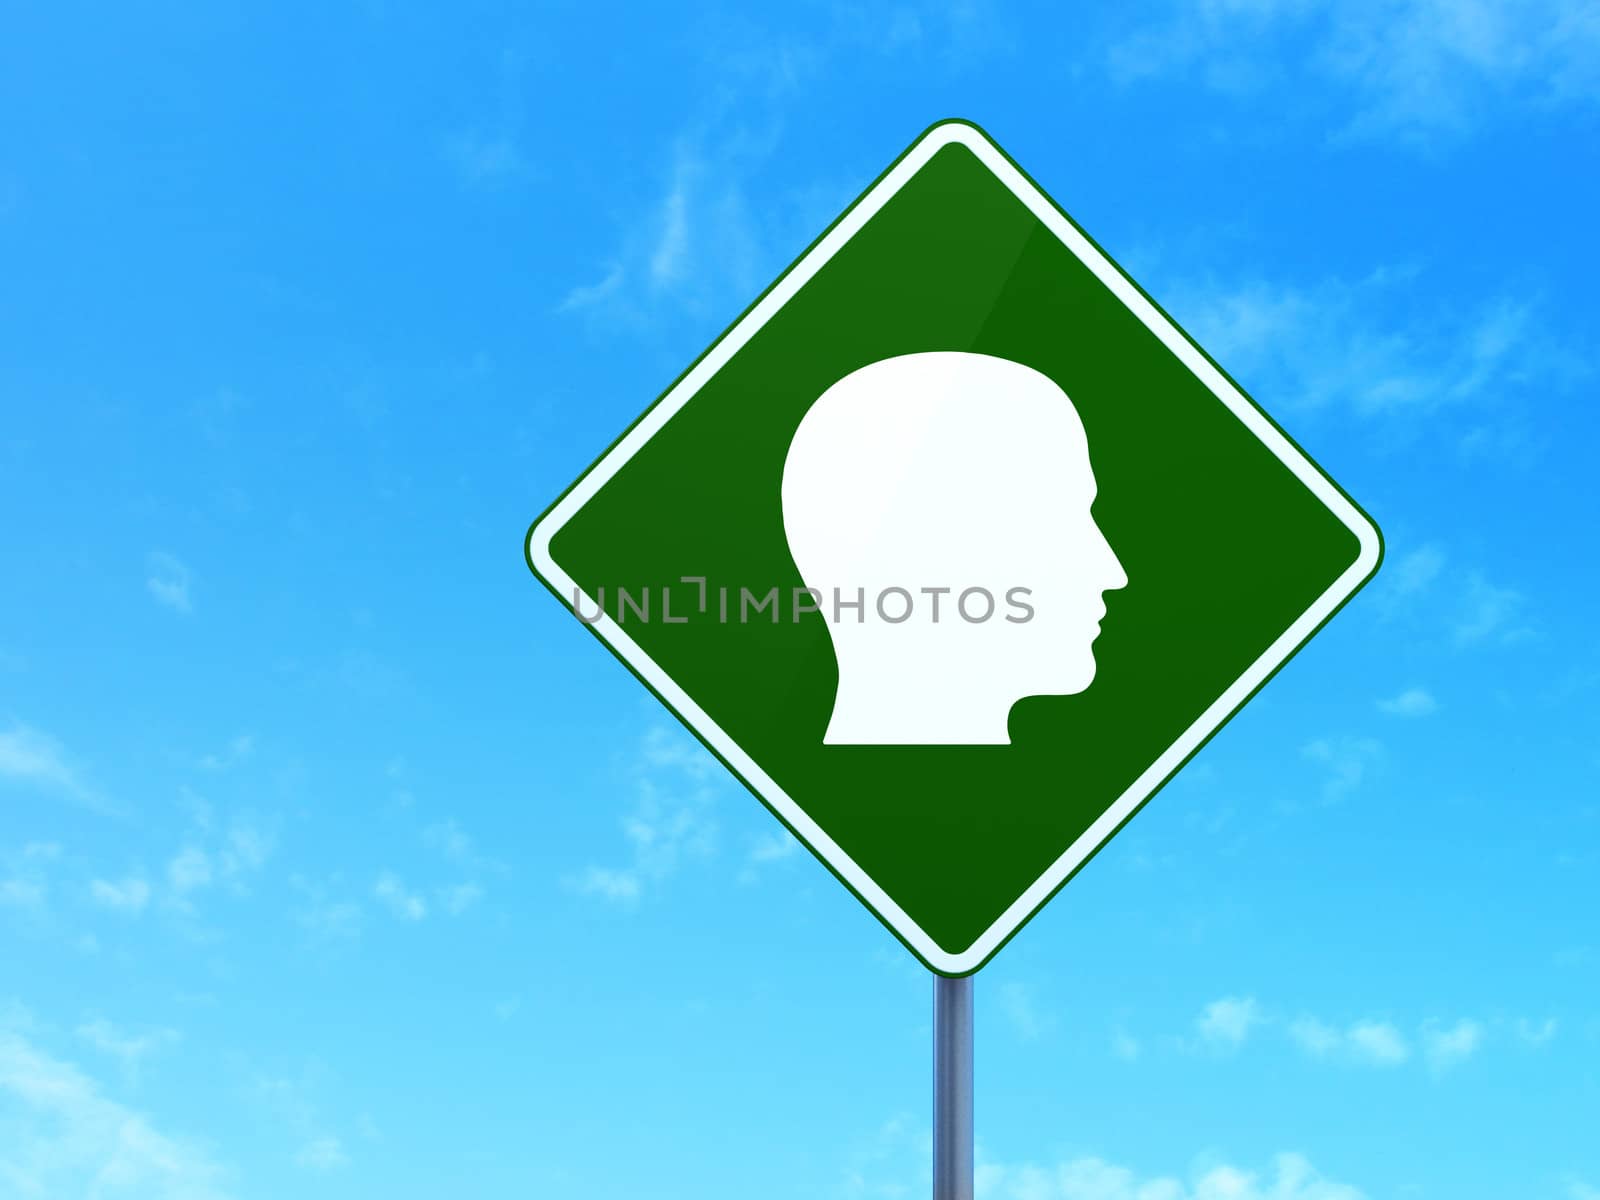 Data concept: Head on green road (highway) sign, clear blue sky background, 3d render